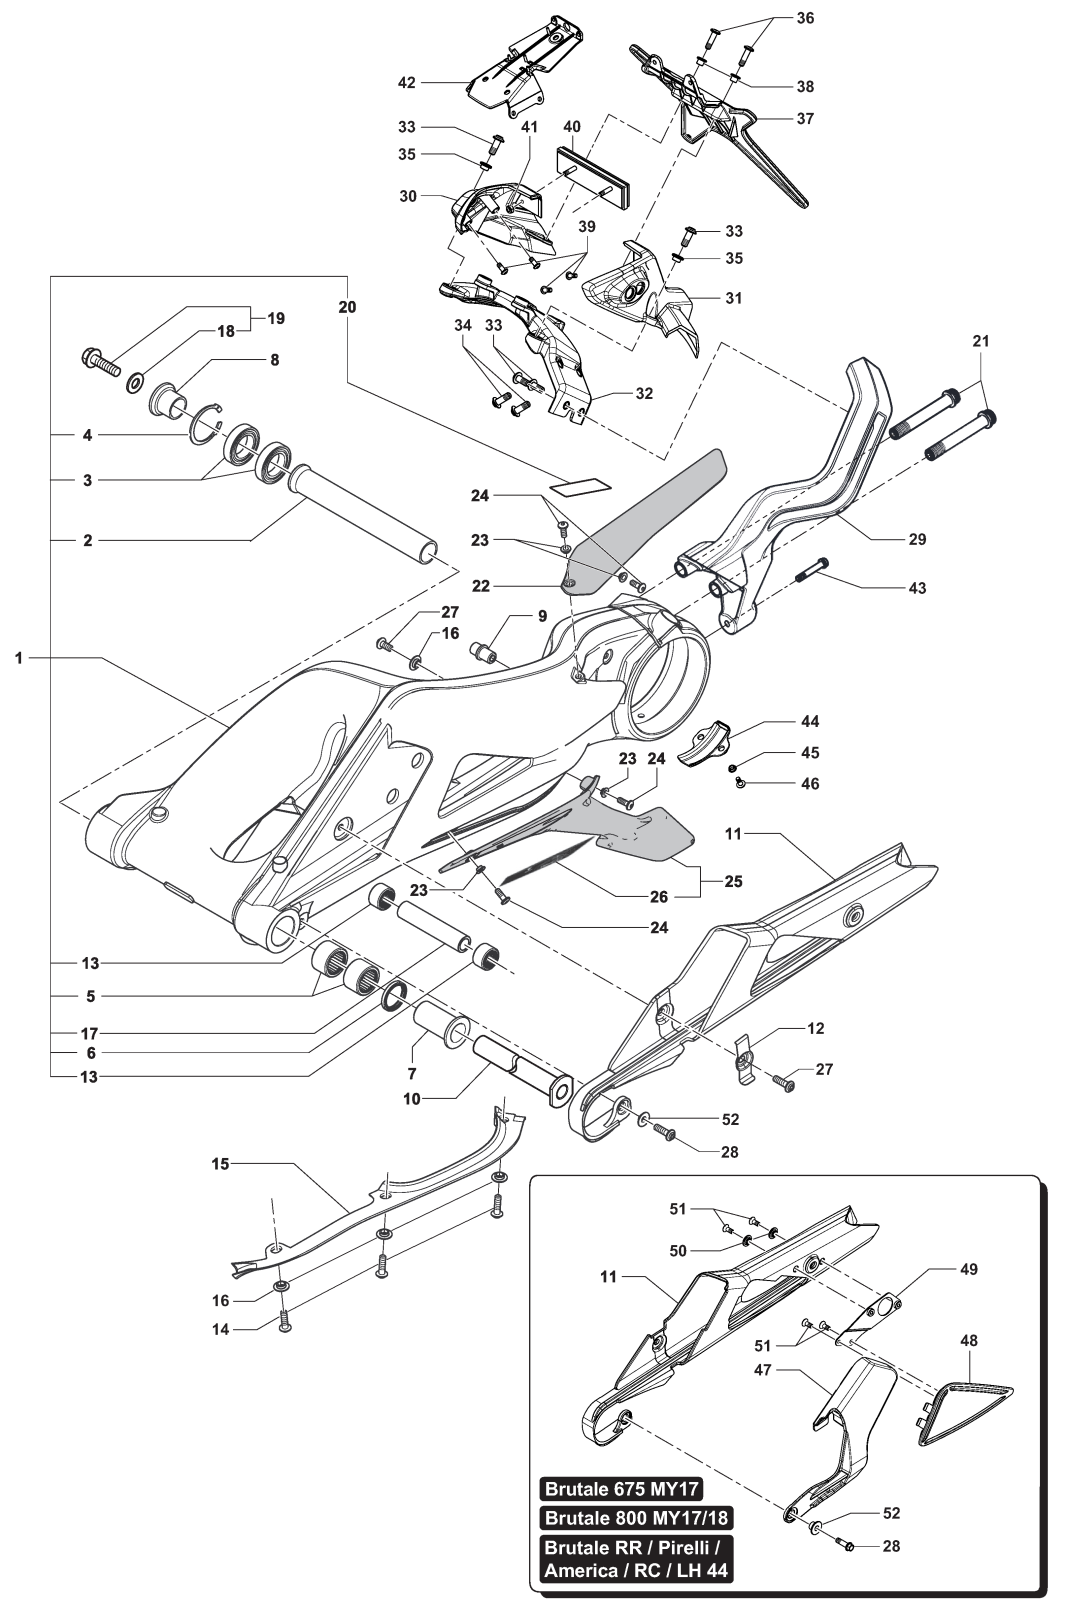 Swinging Arm Assembly


